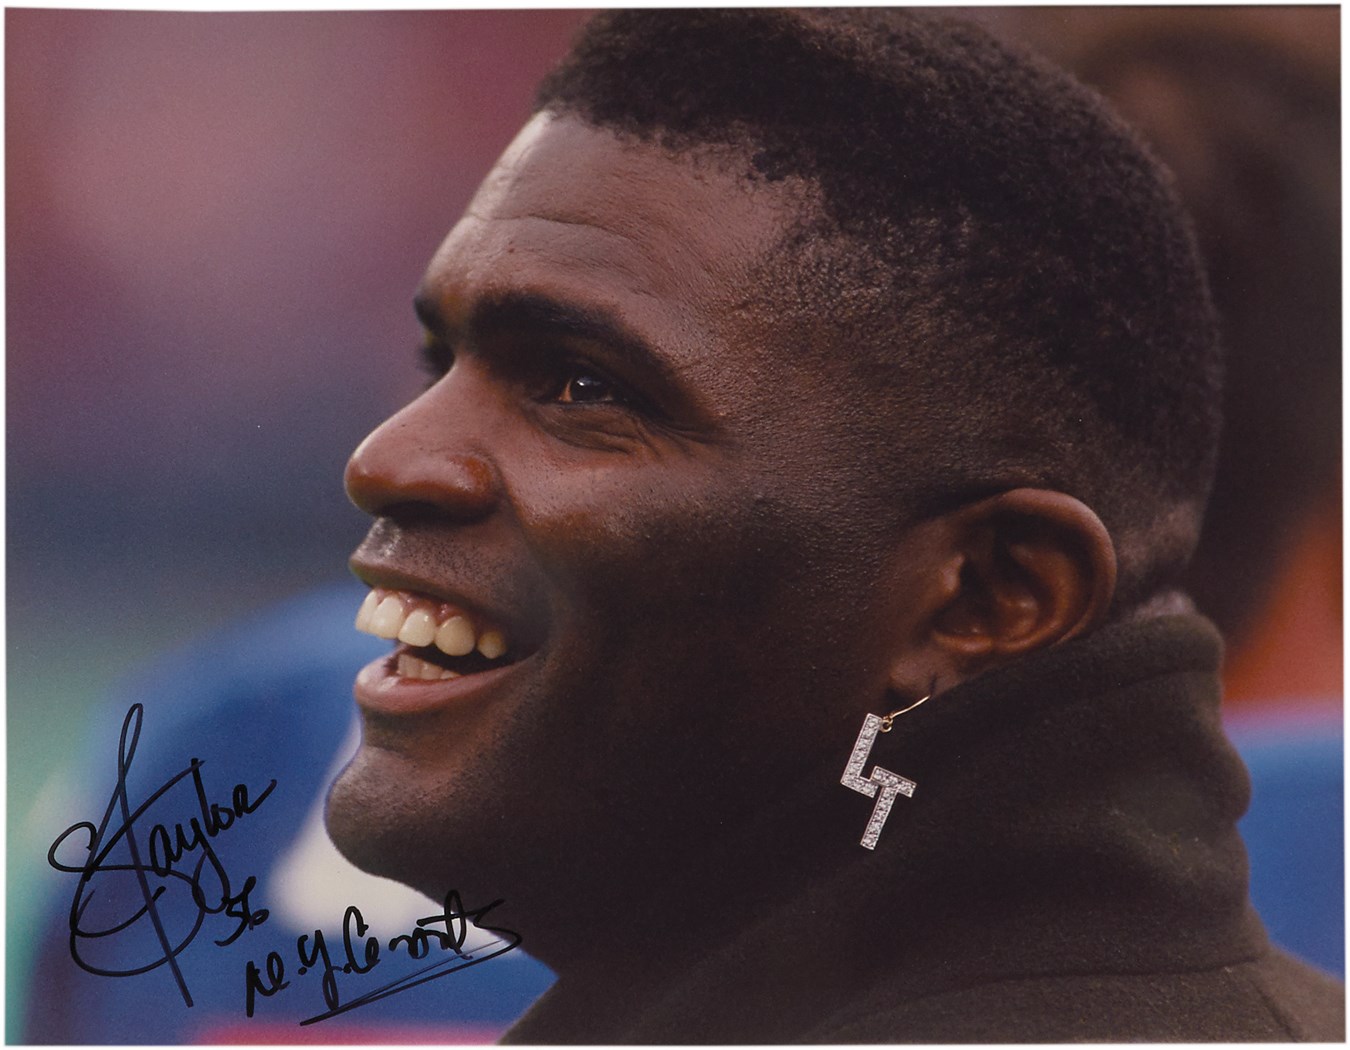 Football - Exemplary Lawrence Taylor 16x20” In Person Signed Photograph from VIP Photographer Richard Brightly